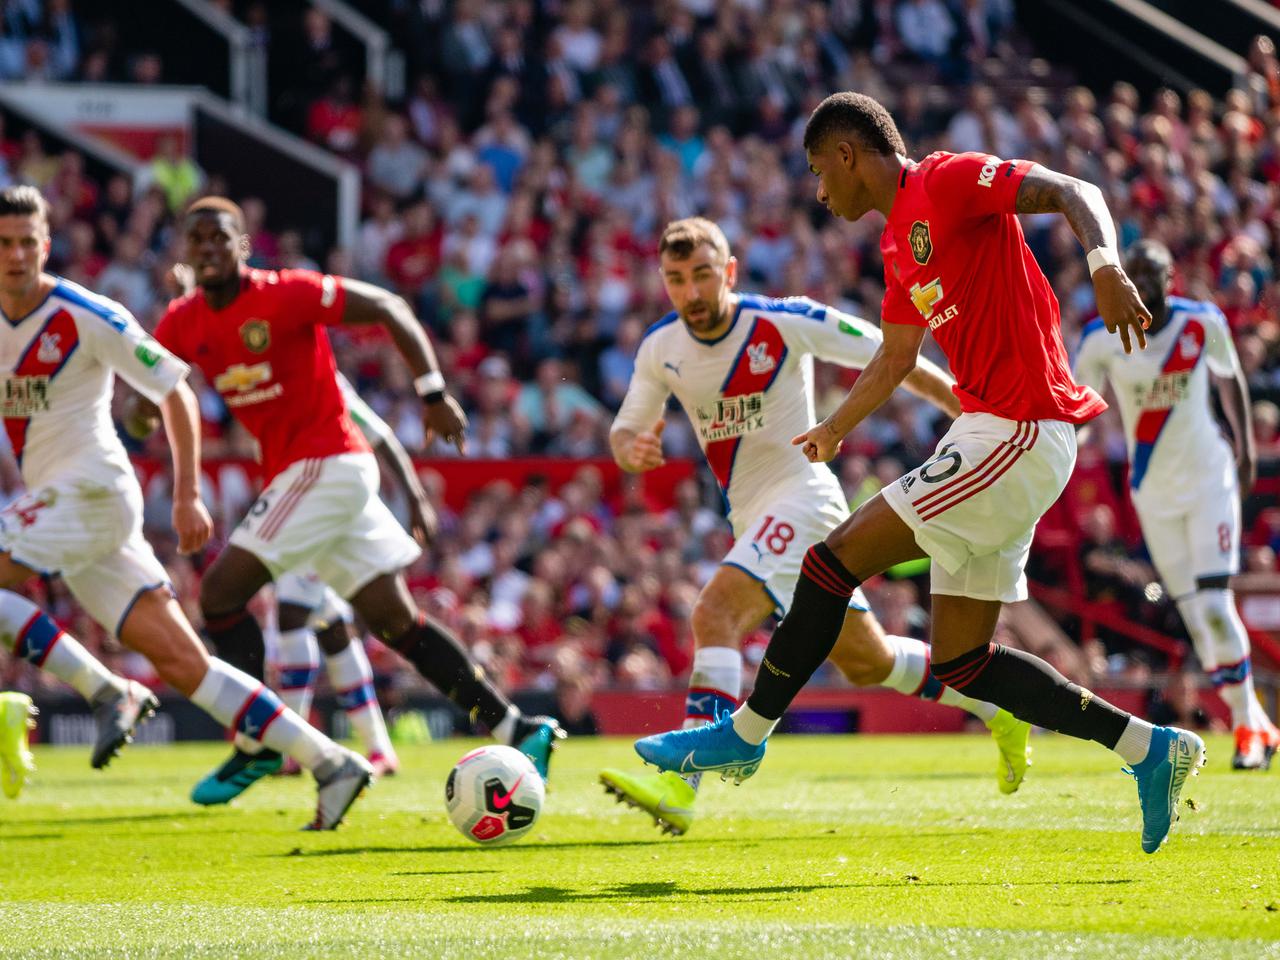 Crystal Palace v Man Utd live TV channel, how to follow online Manchester United